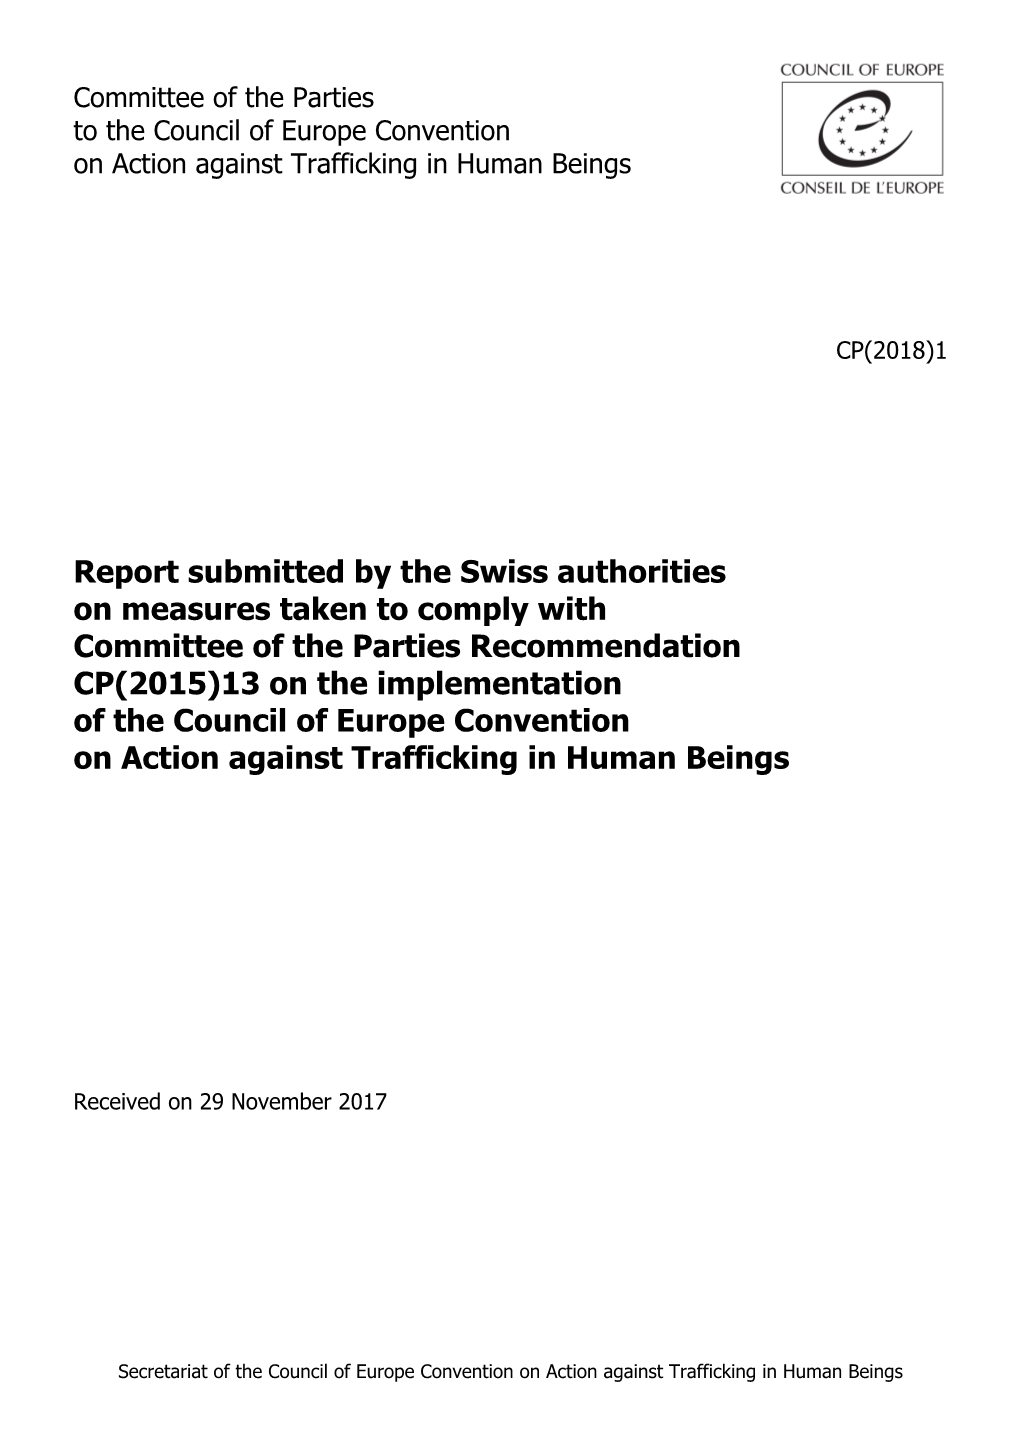 Report Submitted by the Swiss Authorities on Measures